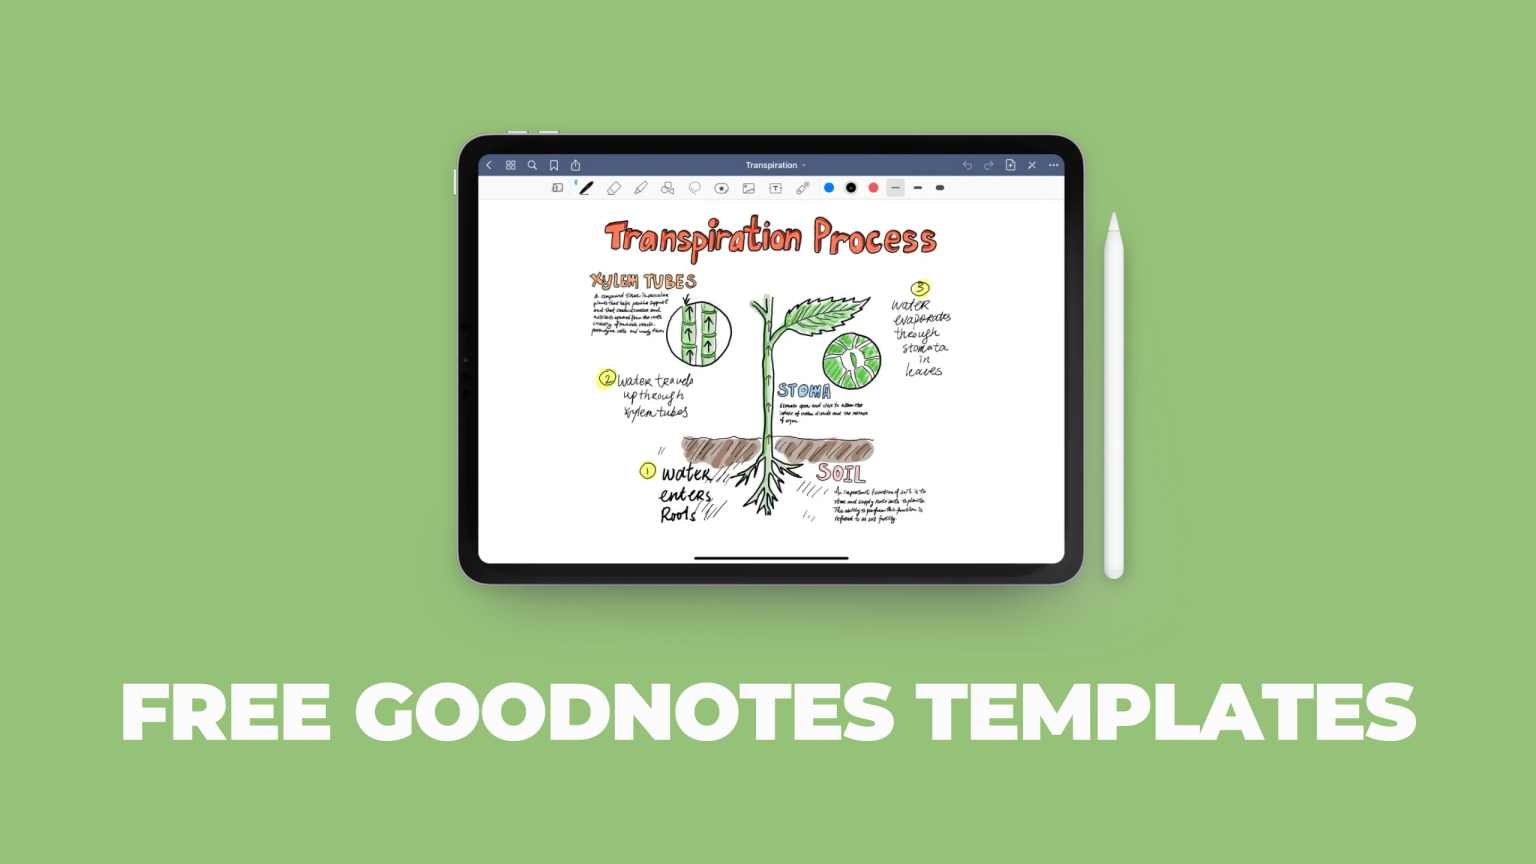 how to get free goodnotes templates